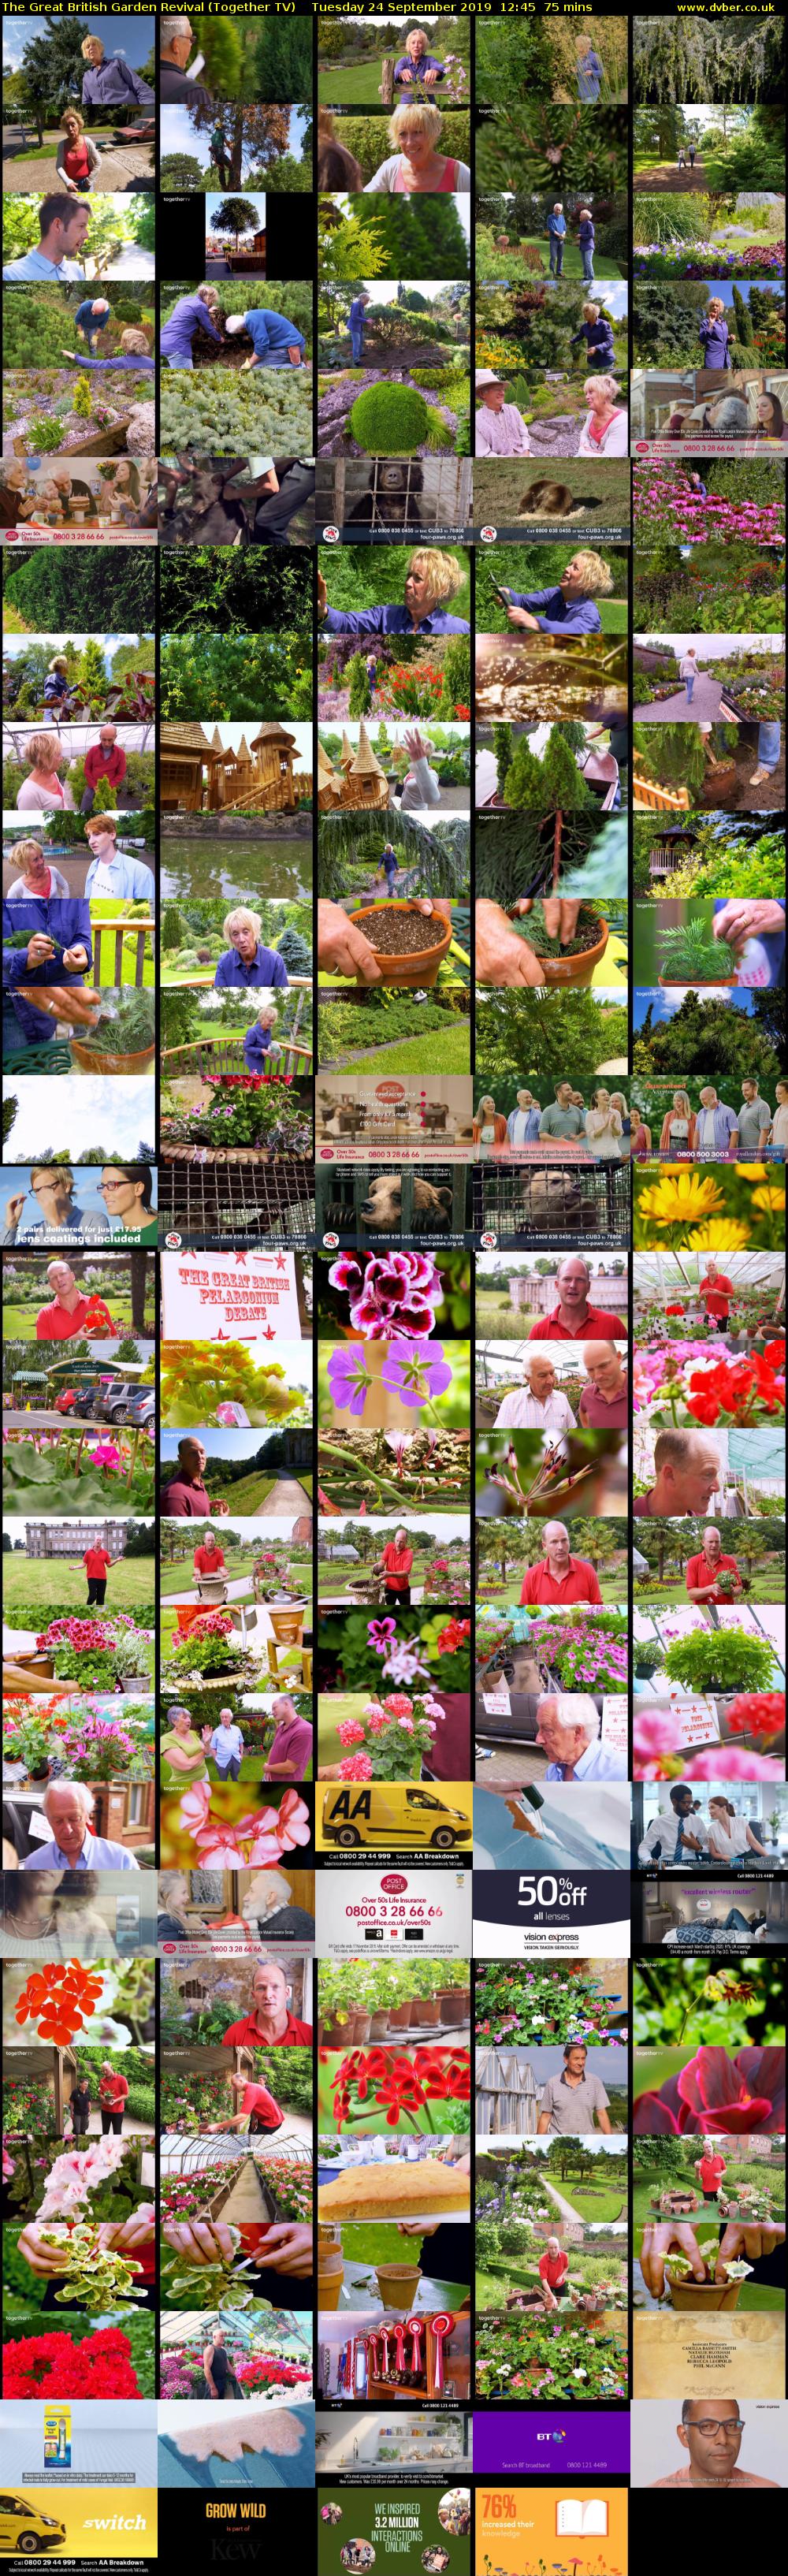 The Great British Garden Revival (Together TV) Tuesday 24 September 2019 12:45 - 14:00